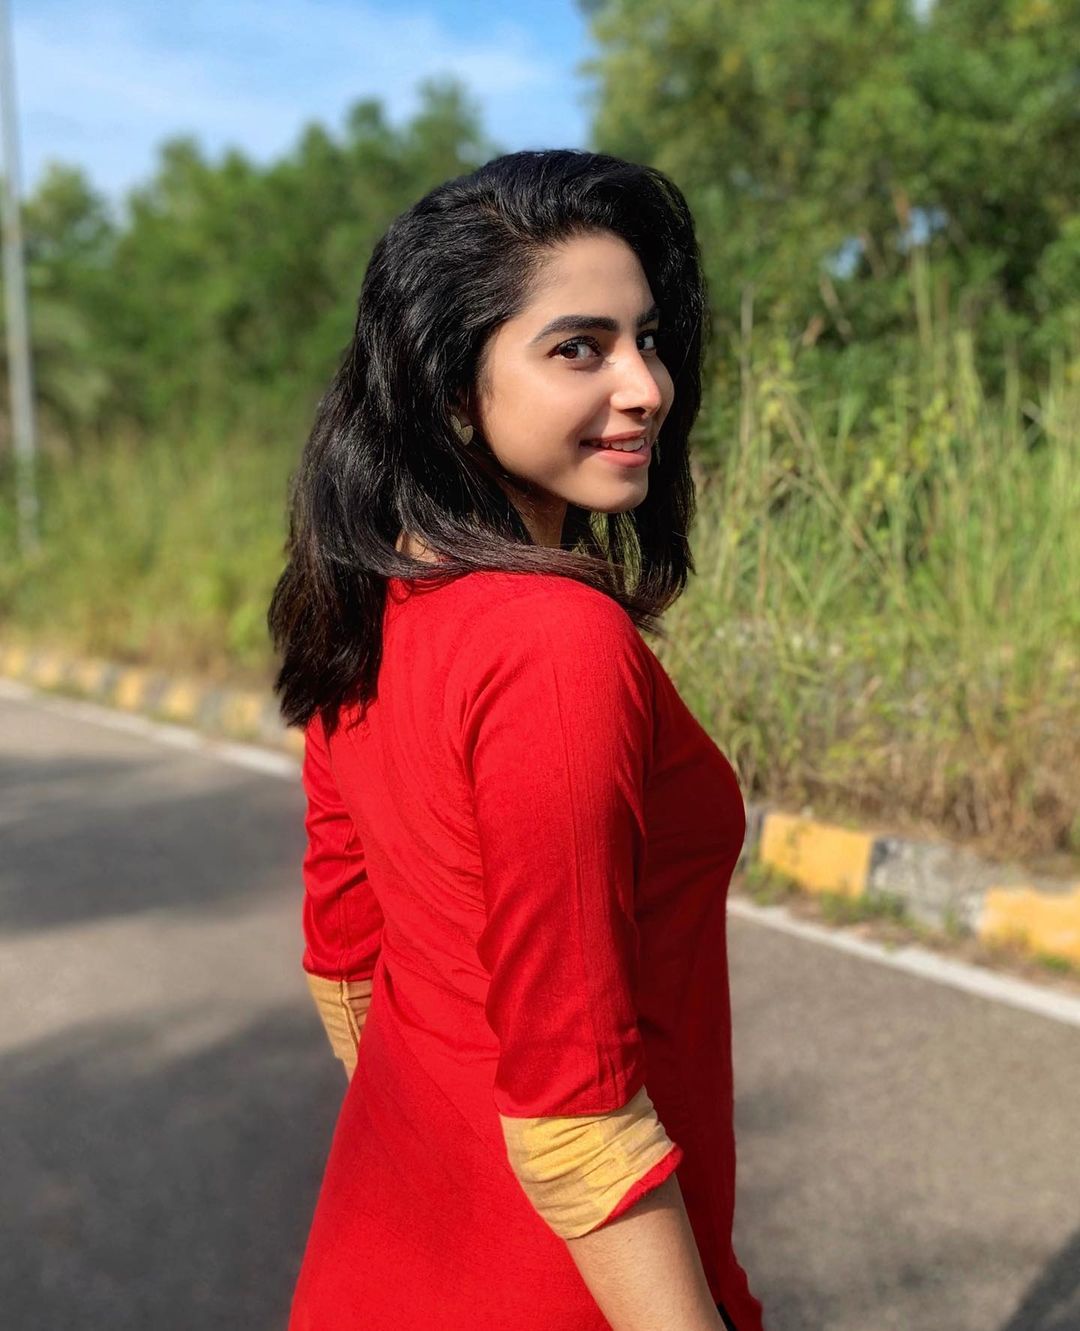 Malayalam actress Ameya Mathew new hot photo gallery Photos: HD Images,  Pictures, Stills, First Look Posters of Malayalam actress Ameya Mathew new  hot photo gallery Movie 